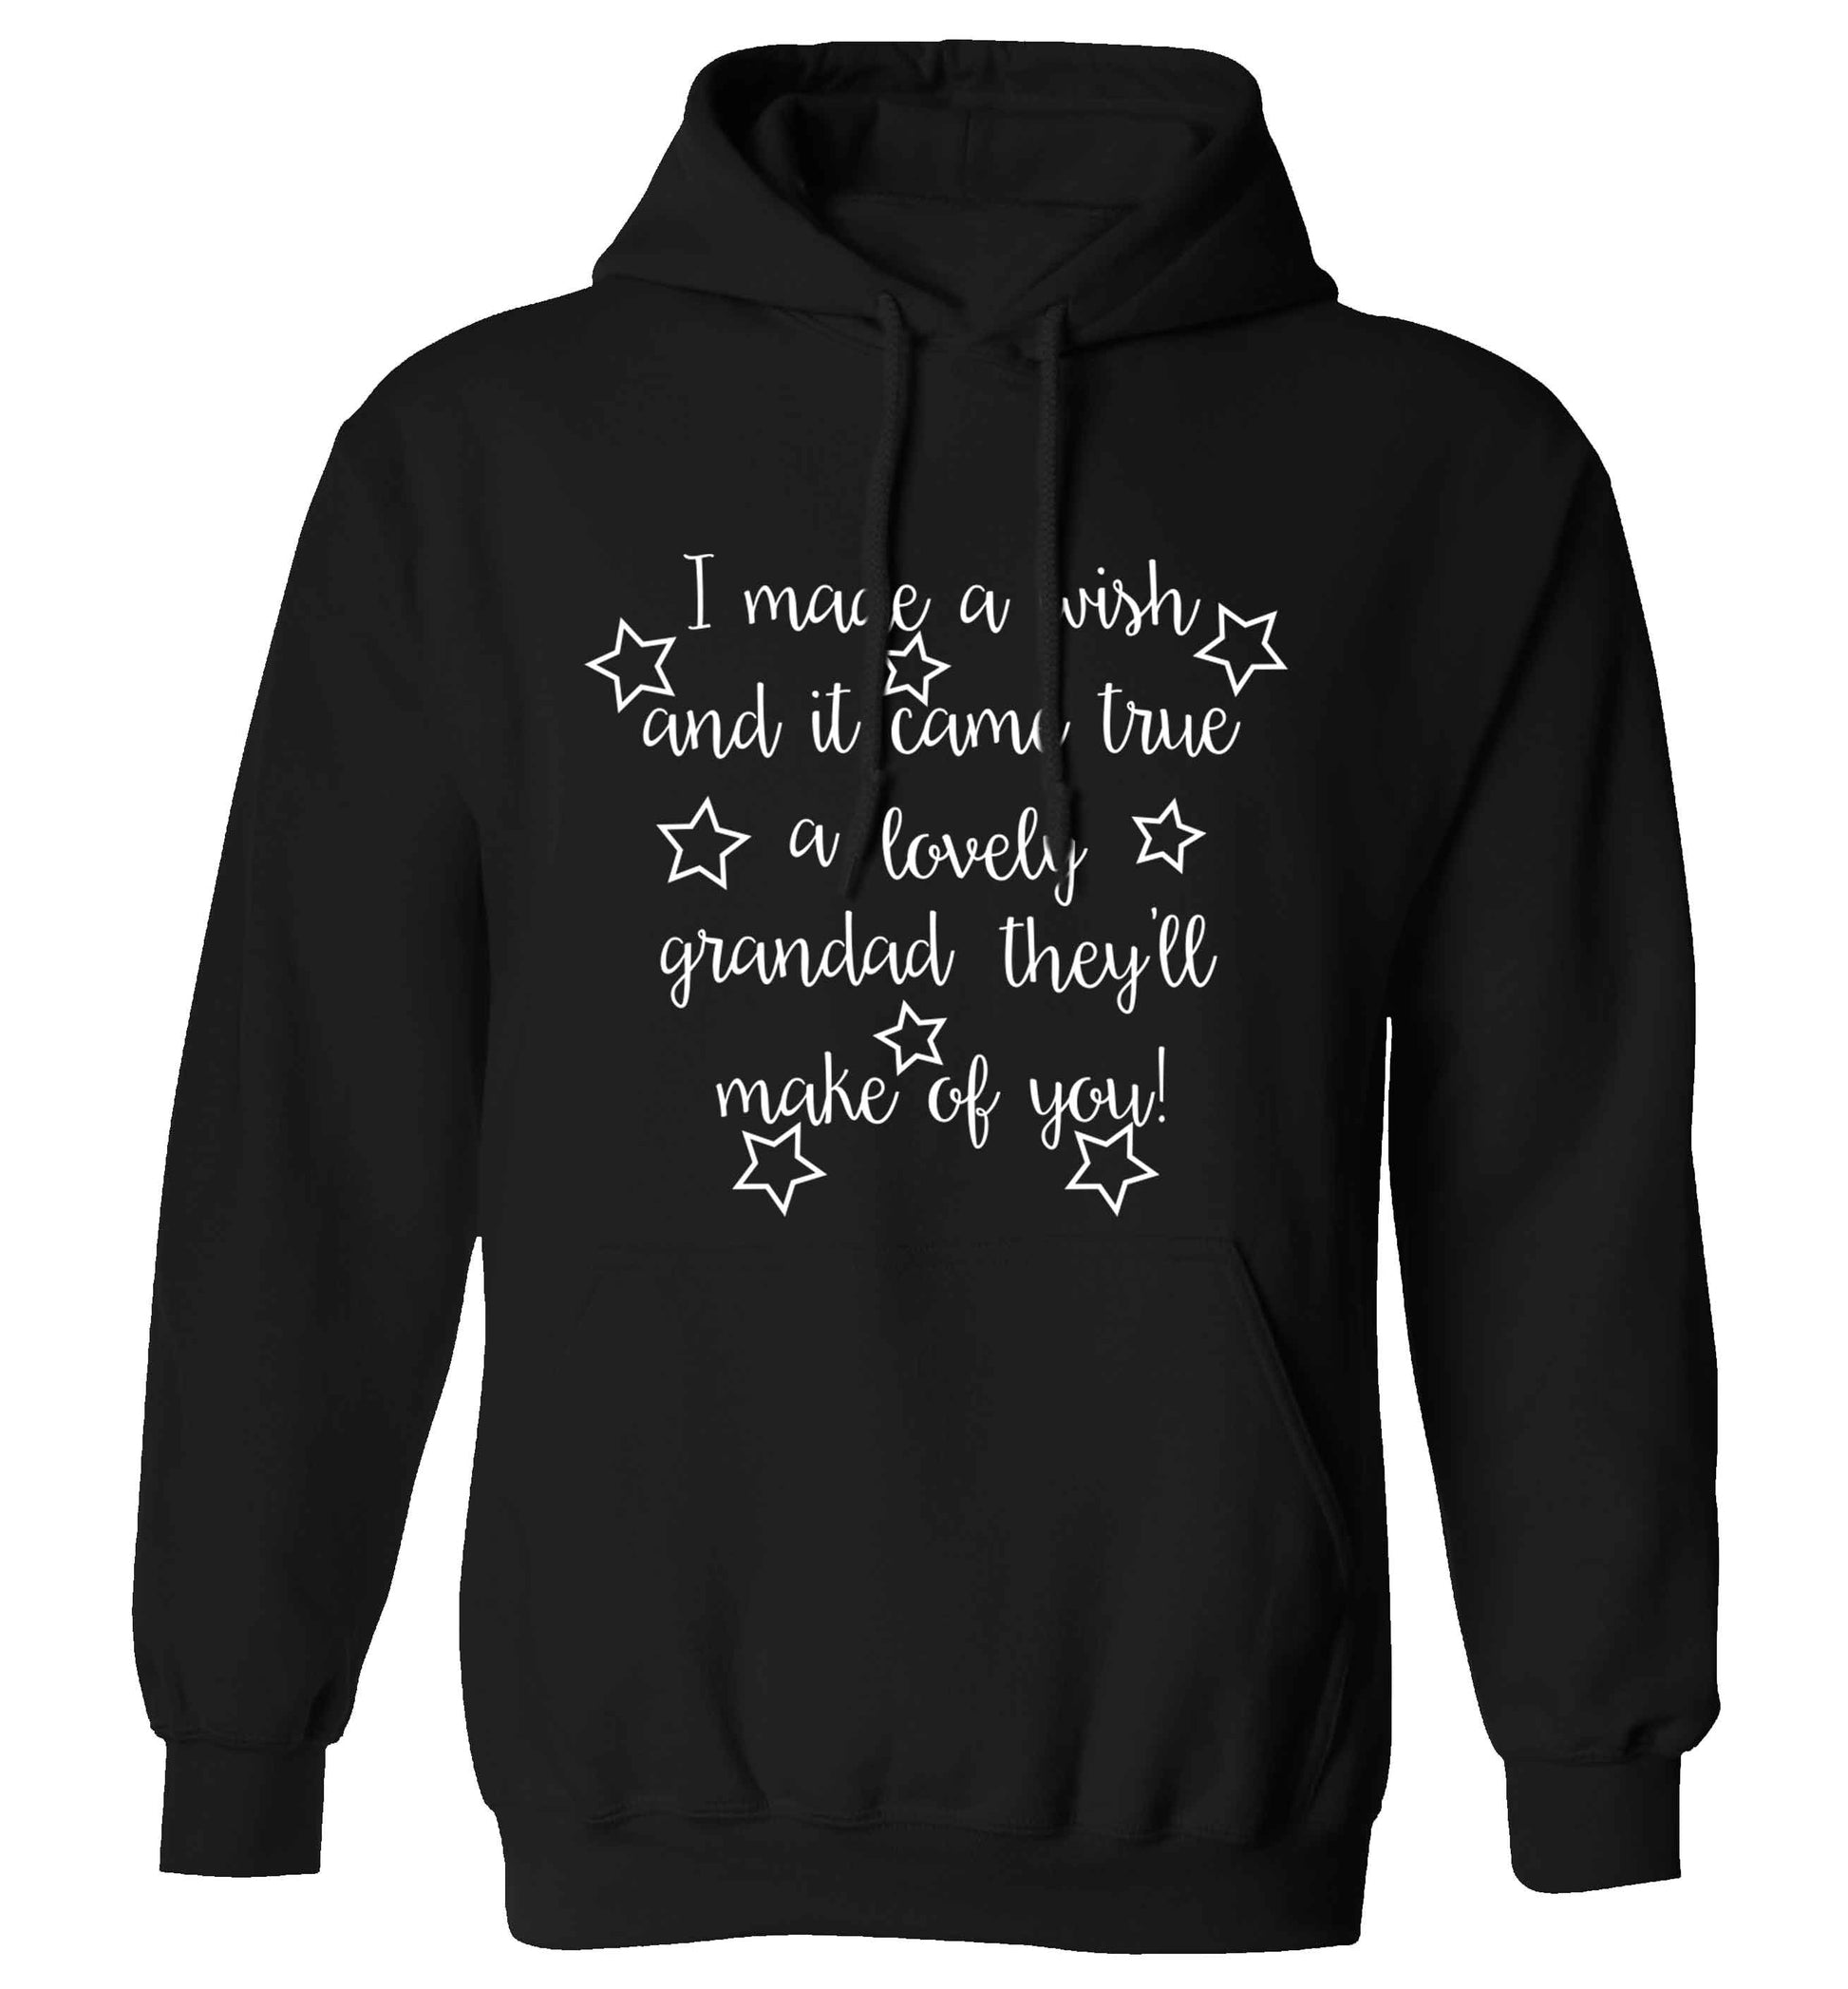 I made a wish and it came true a lovely grandad they'll make of you! adults unisex black hoodie 2XL